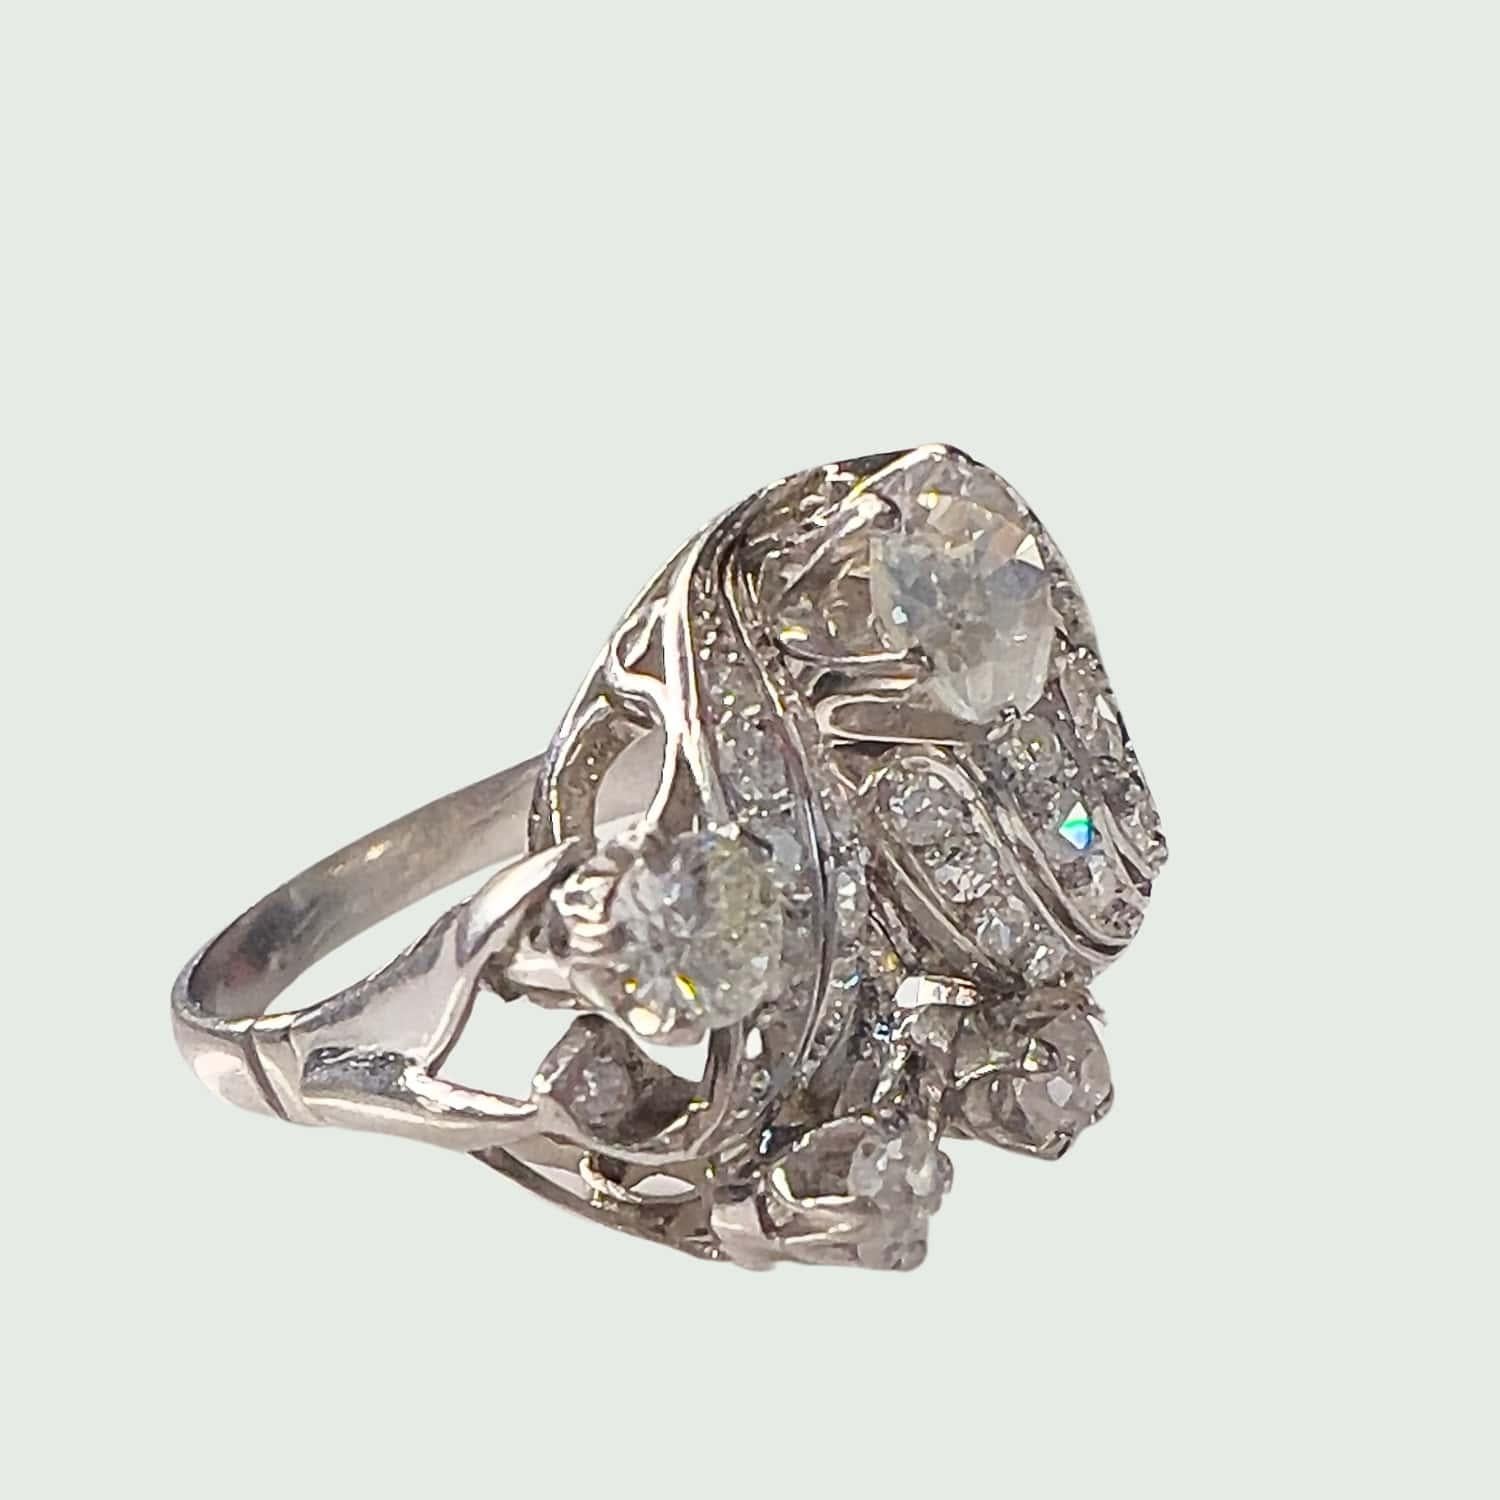 Step back in time with this retro-style ring from the 1940s-1945 period, crafted in platinum 950 kts and adorned with antique and single-cut diamonds. 
The main stone boasts 0.85 carats with VS clarity and H color, while the remaining stones total